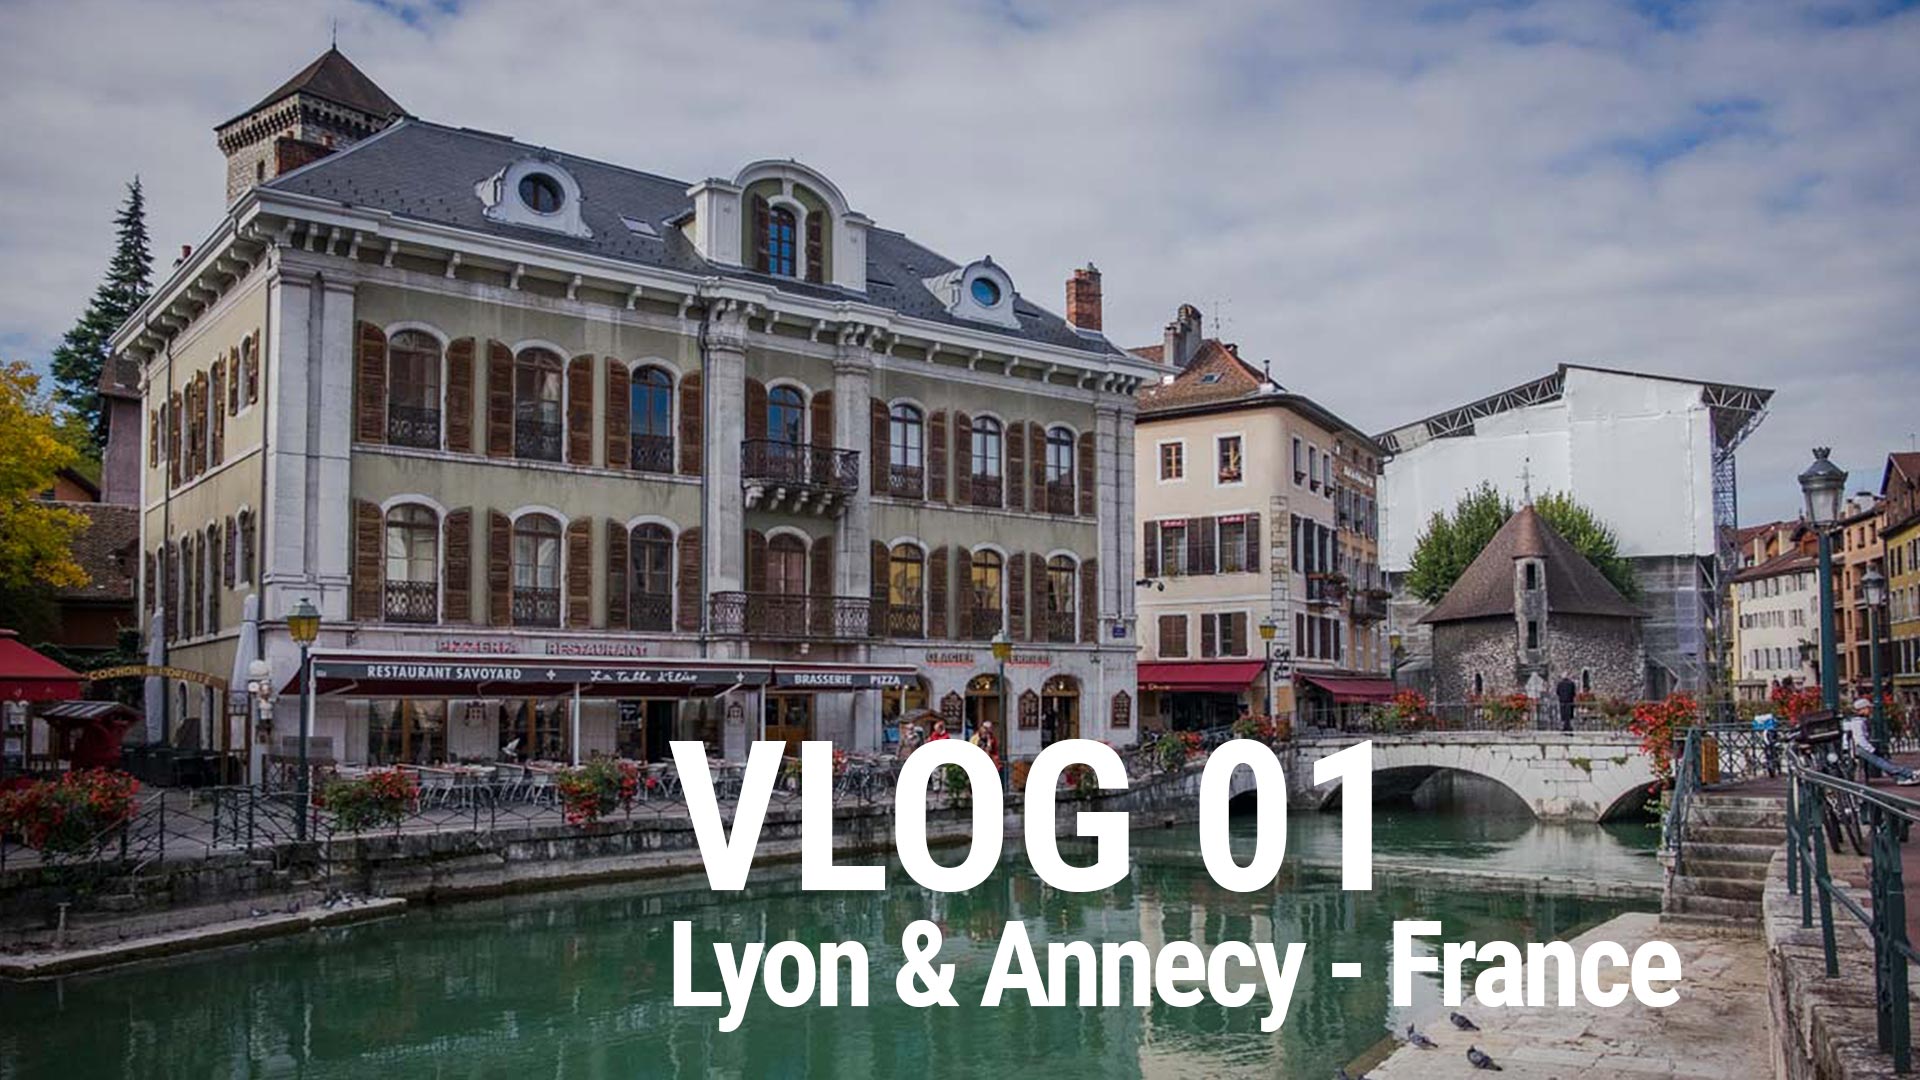 VLOG Launched – First VLOG takes you to France